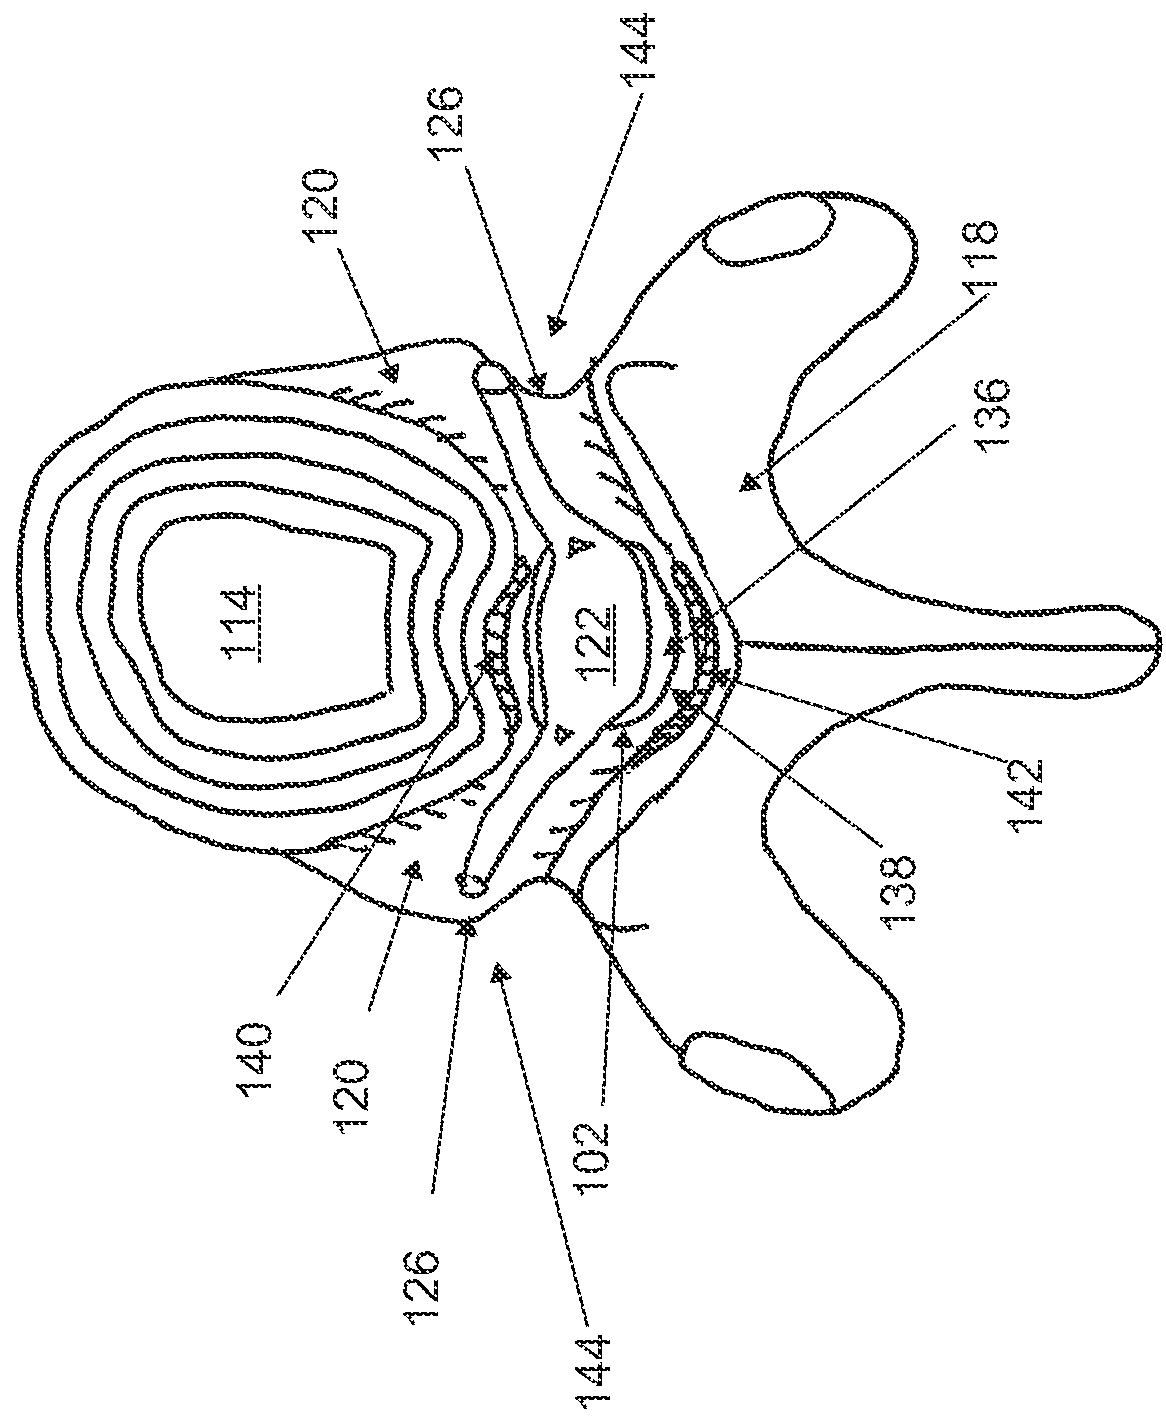 Method and devices for treating spinal stenosis